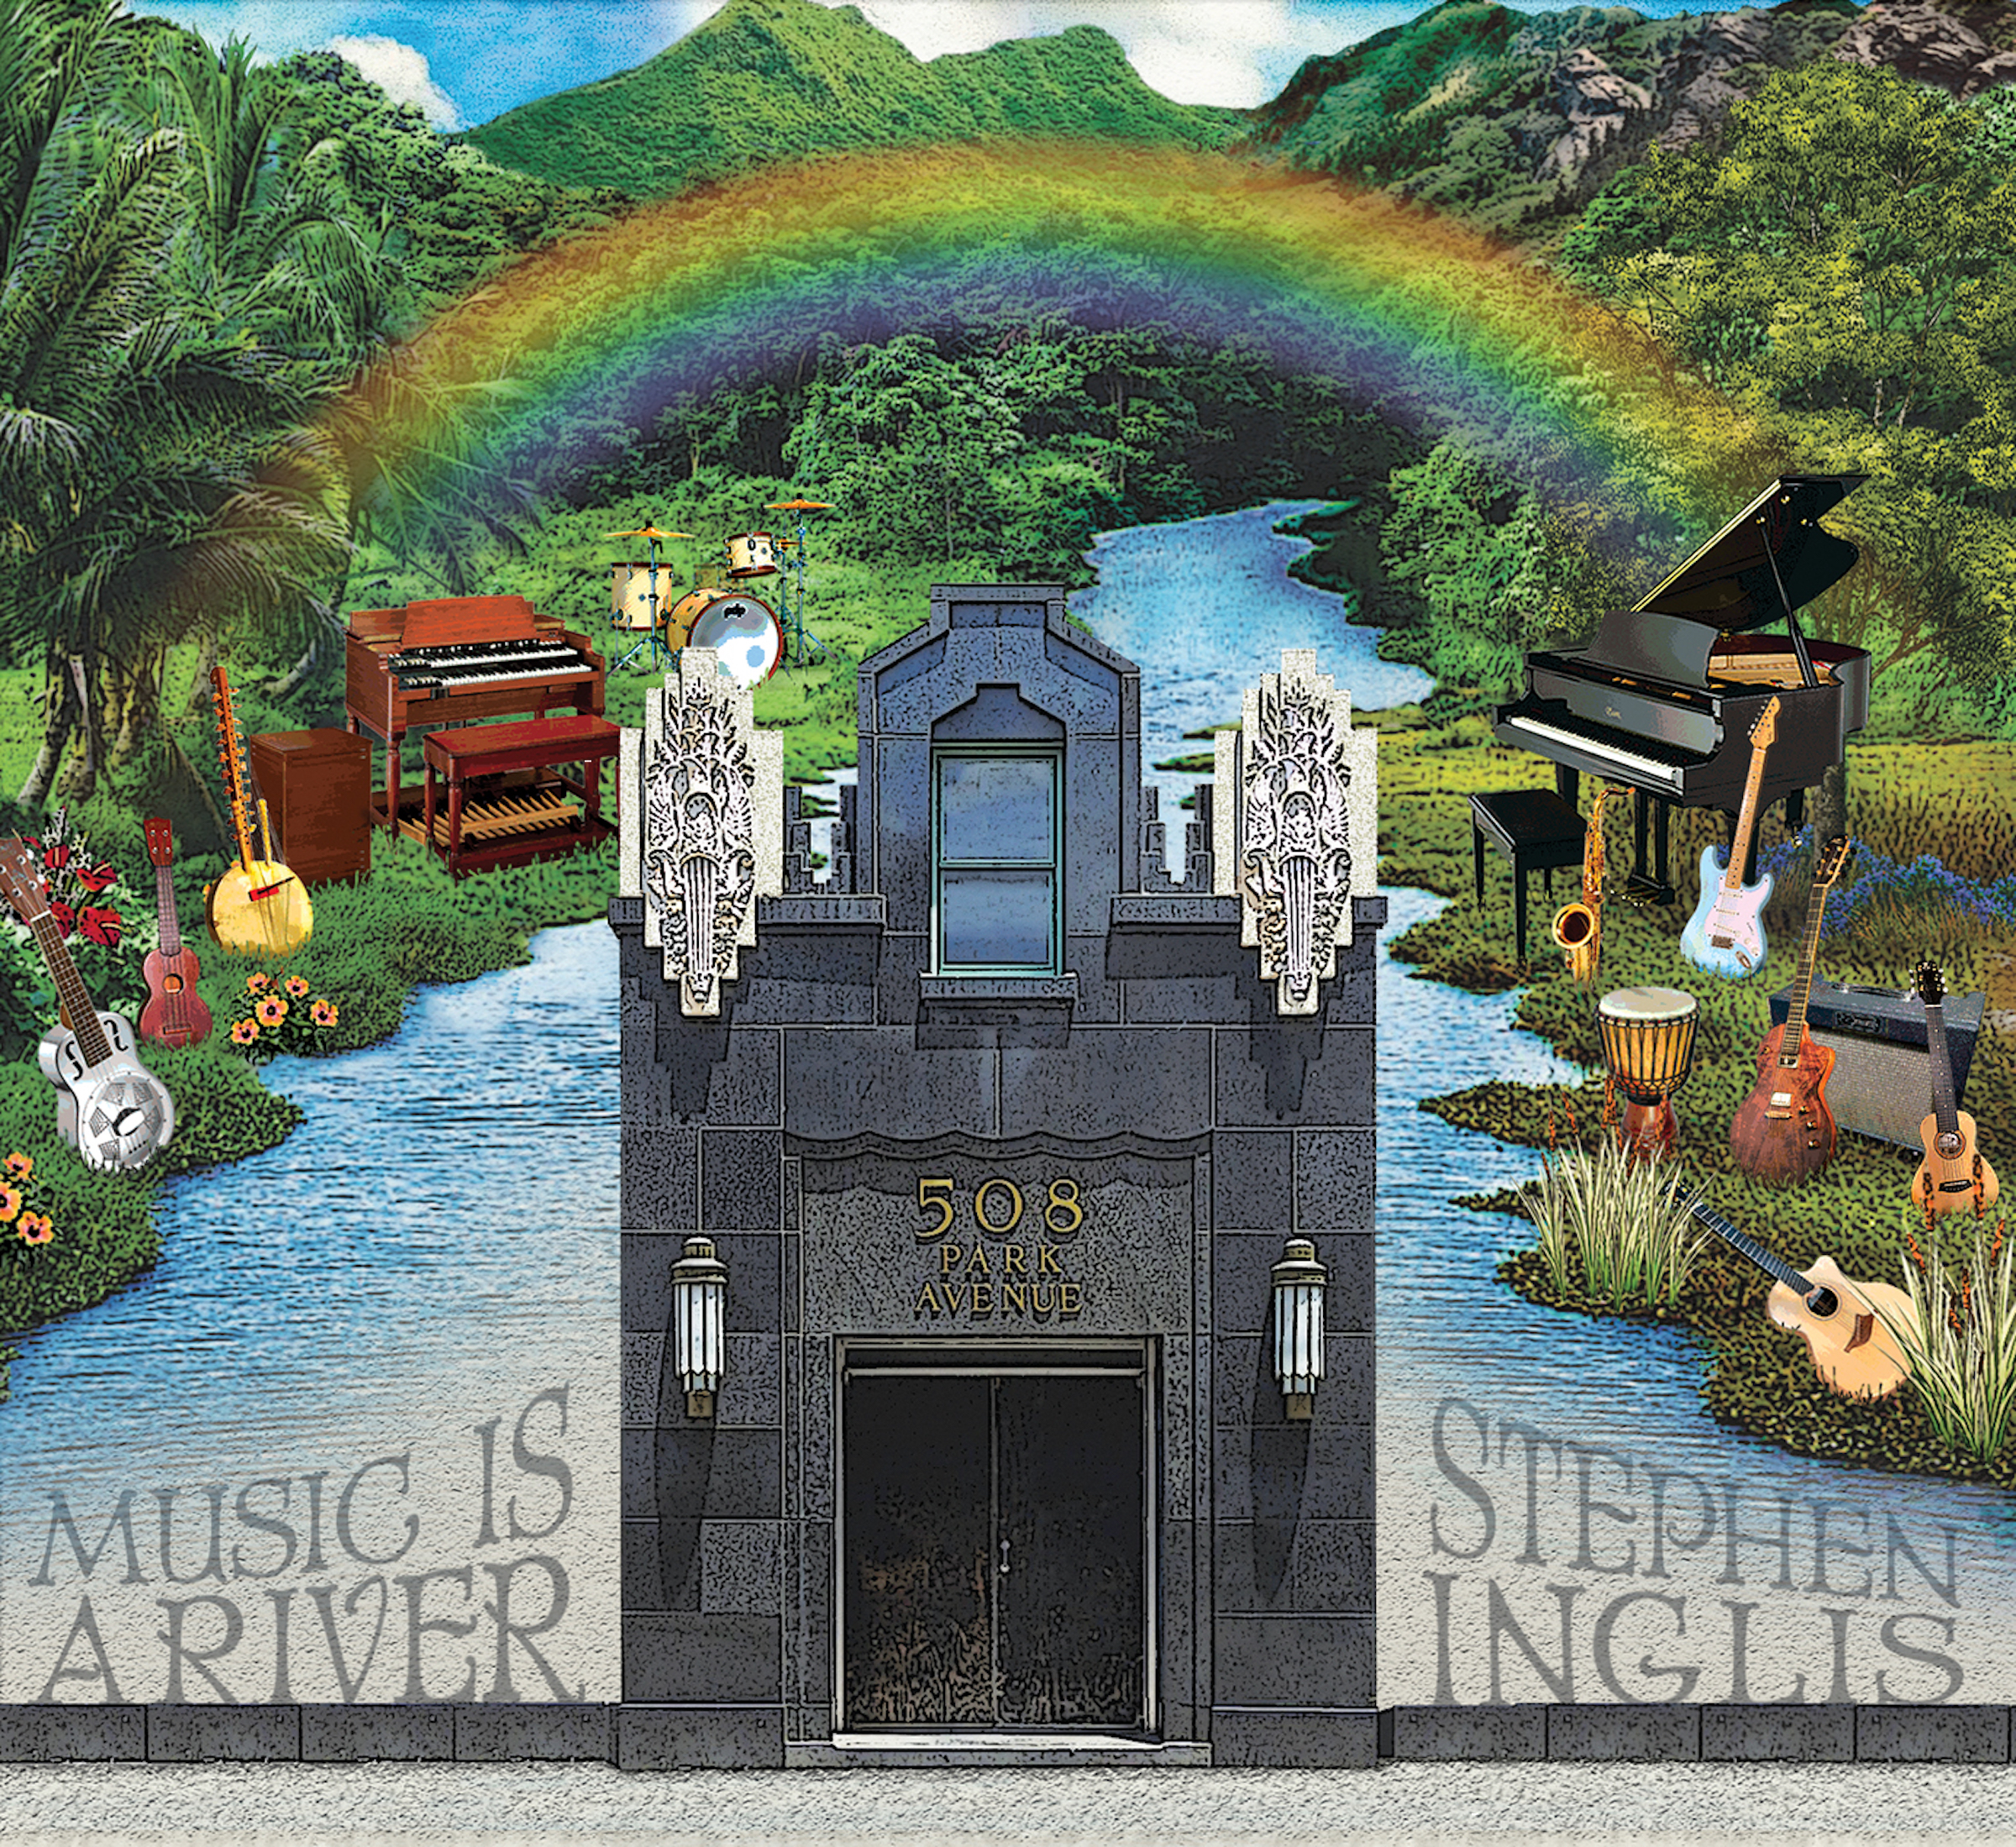 Stephen Inglis Releases New Single, 'Music Is A River'